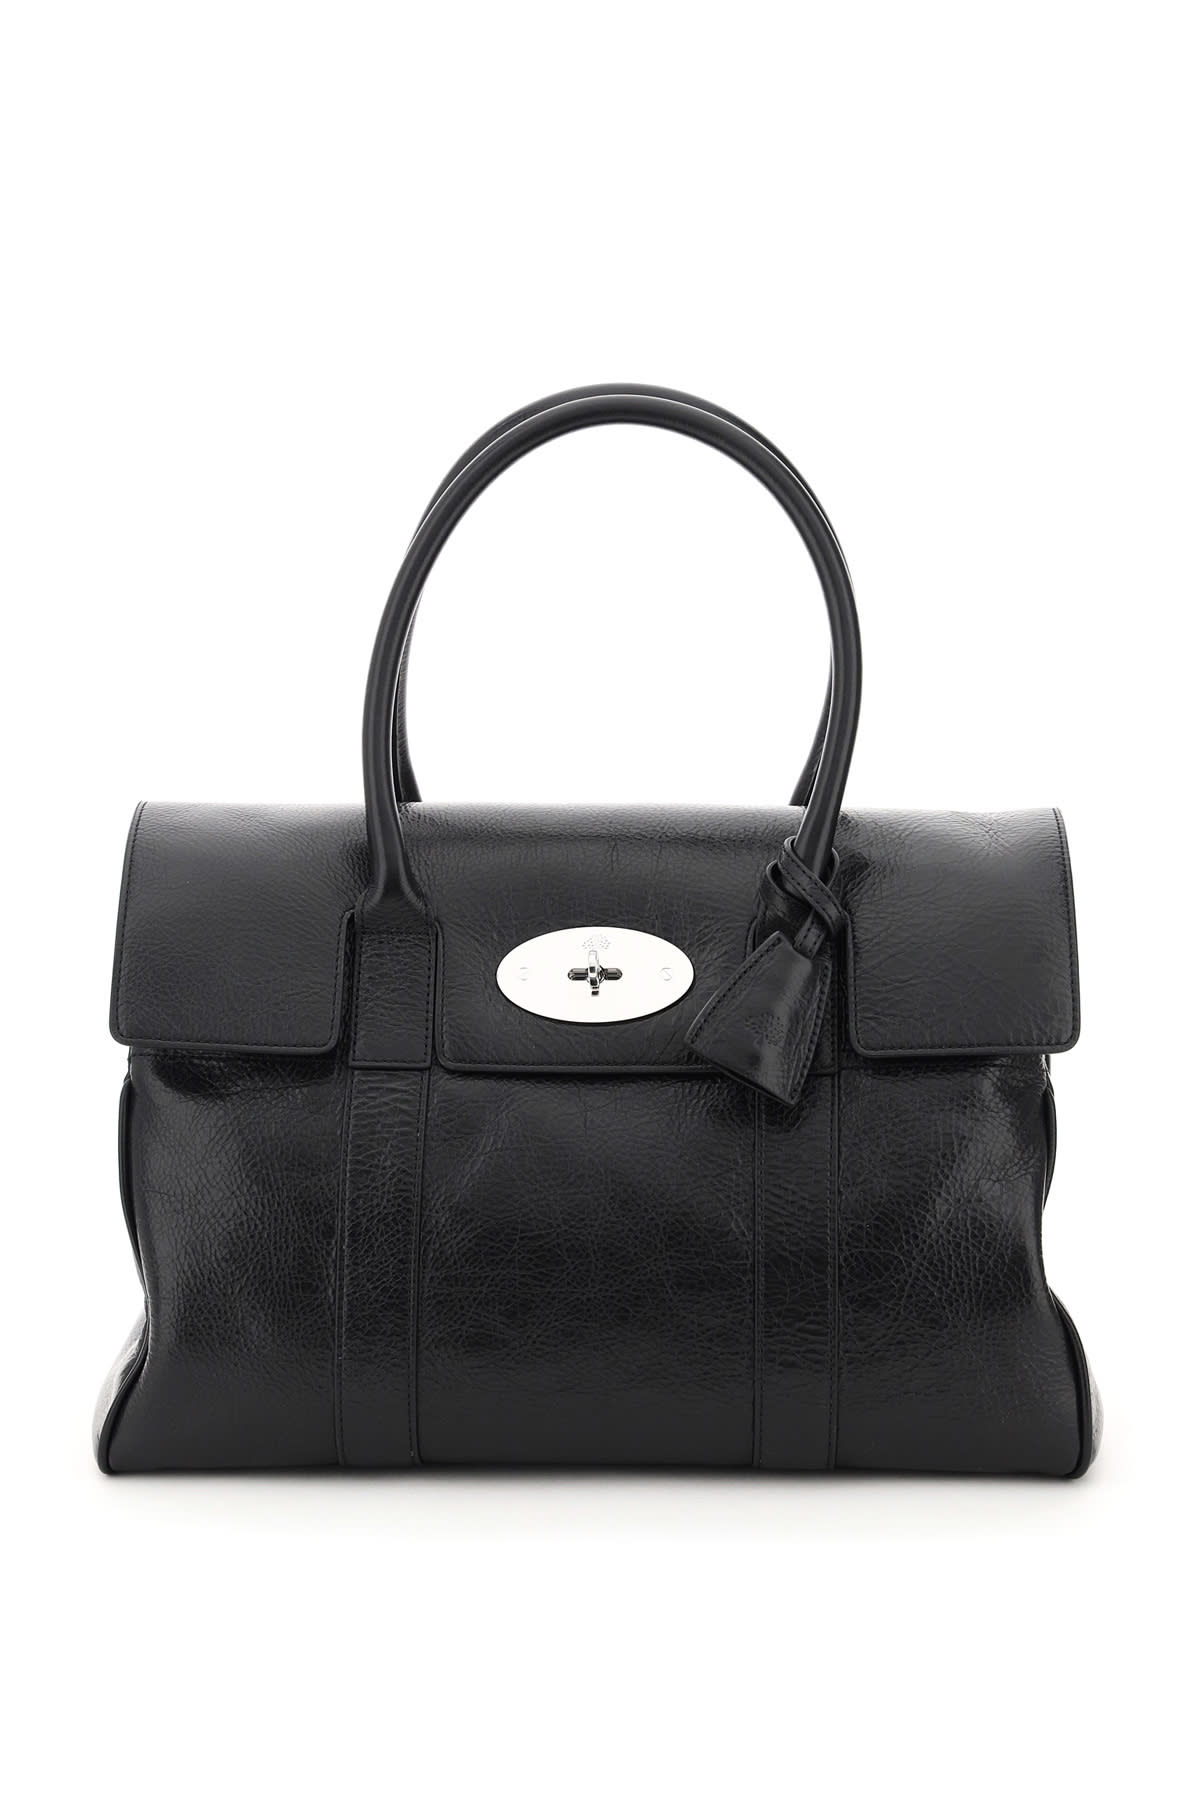 Mulberry Bayswater Soft Small Bag